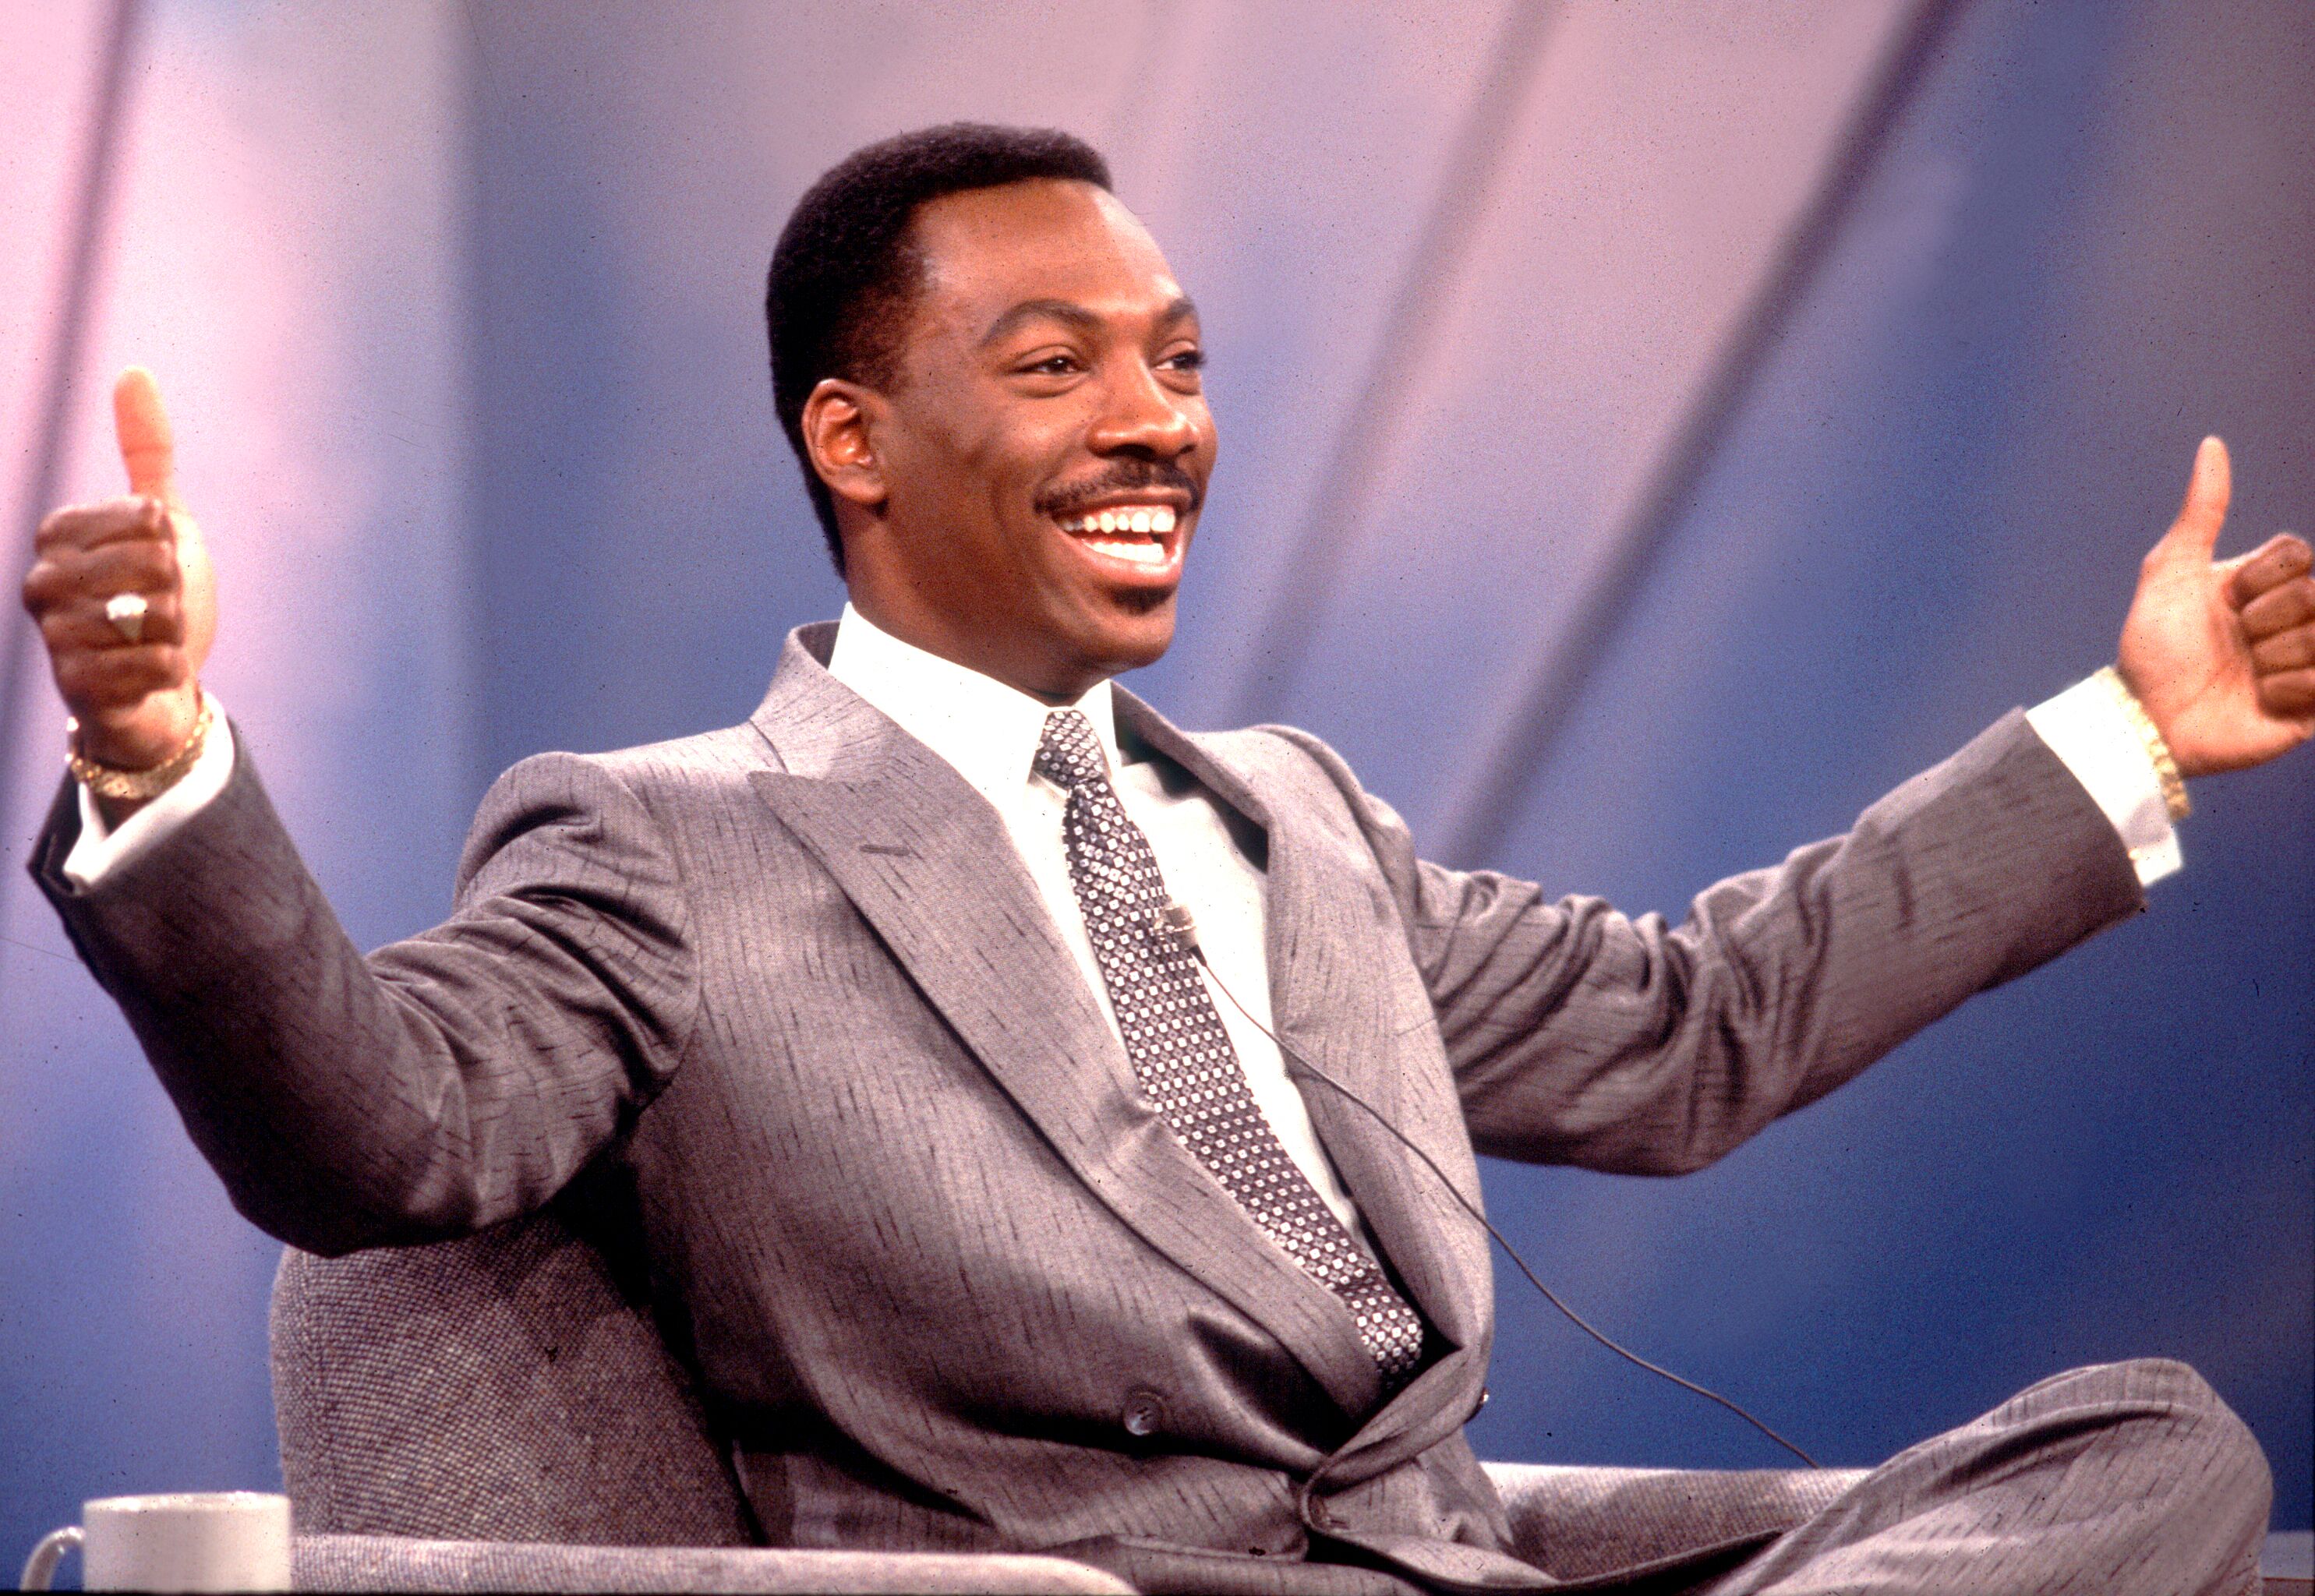 Eddie Murphy appears as a guest on the set of the "Oprah Winfrey Show." | Source: Getty Images